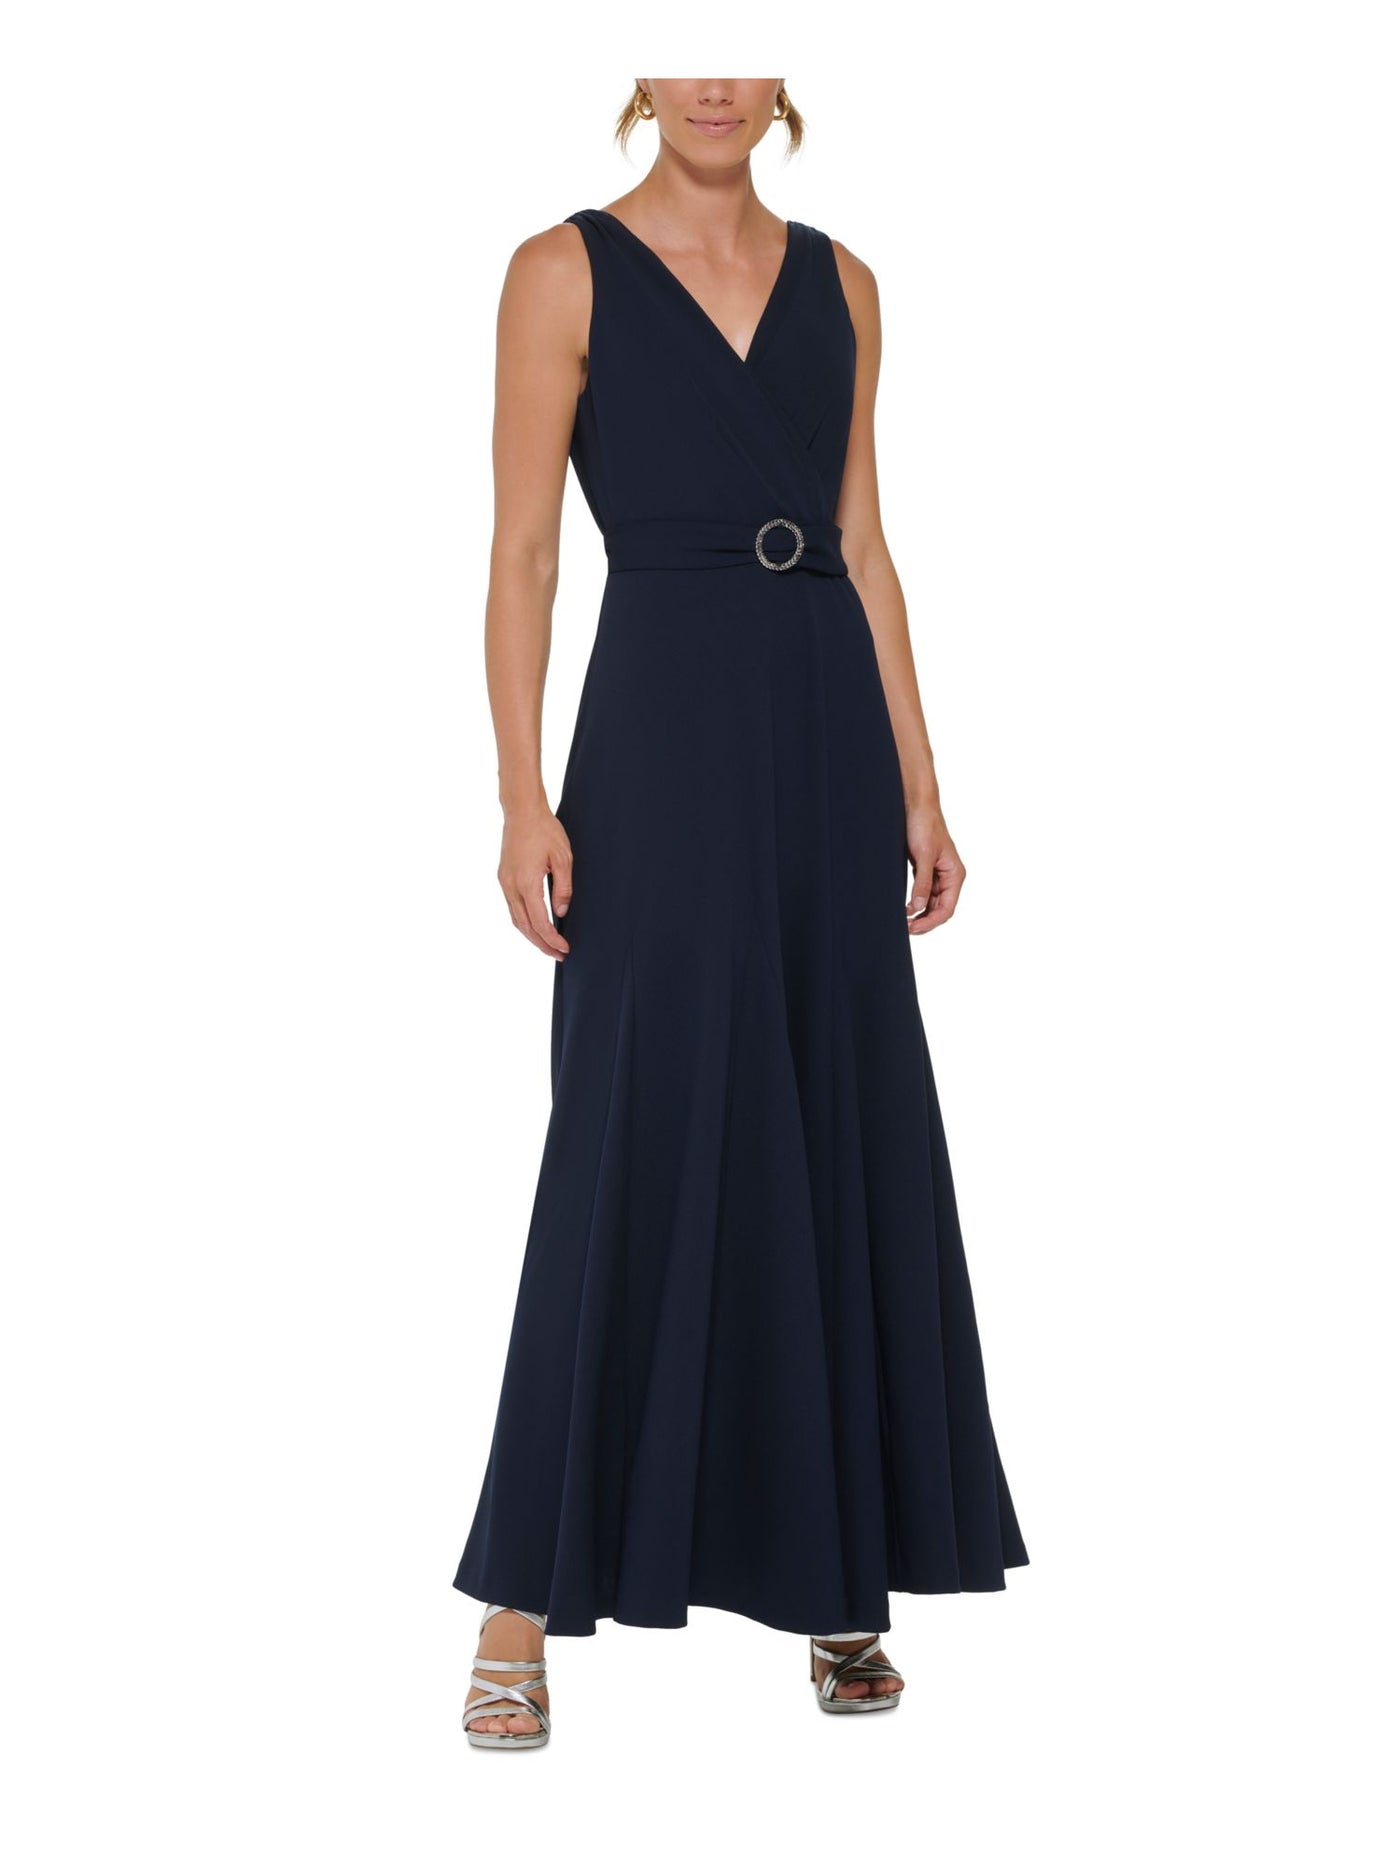 DKNY Womens Navy Zippered Belted Pleated Lined Bodice Godets Sleeveless V Neck Full-Length Formal Gown Dress 8